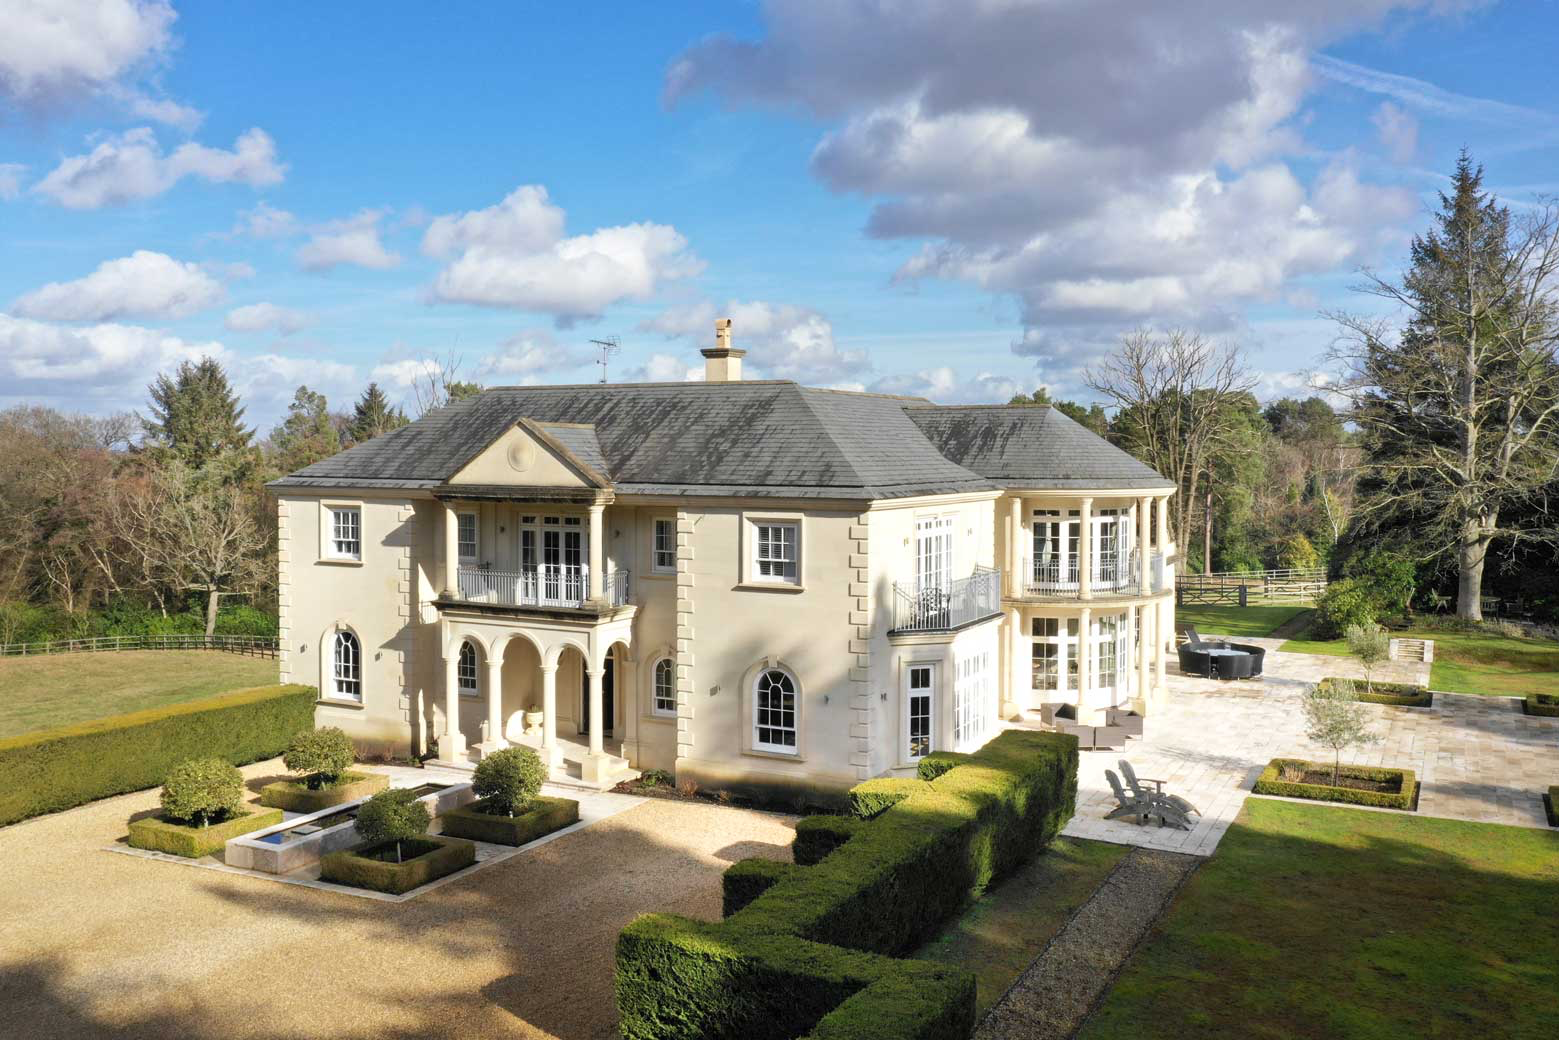 property photography and video by johnjoe in Hampshire Berkshire